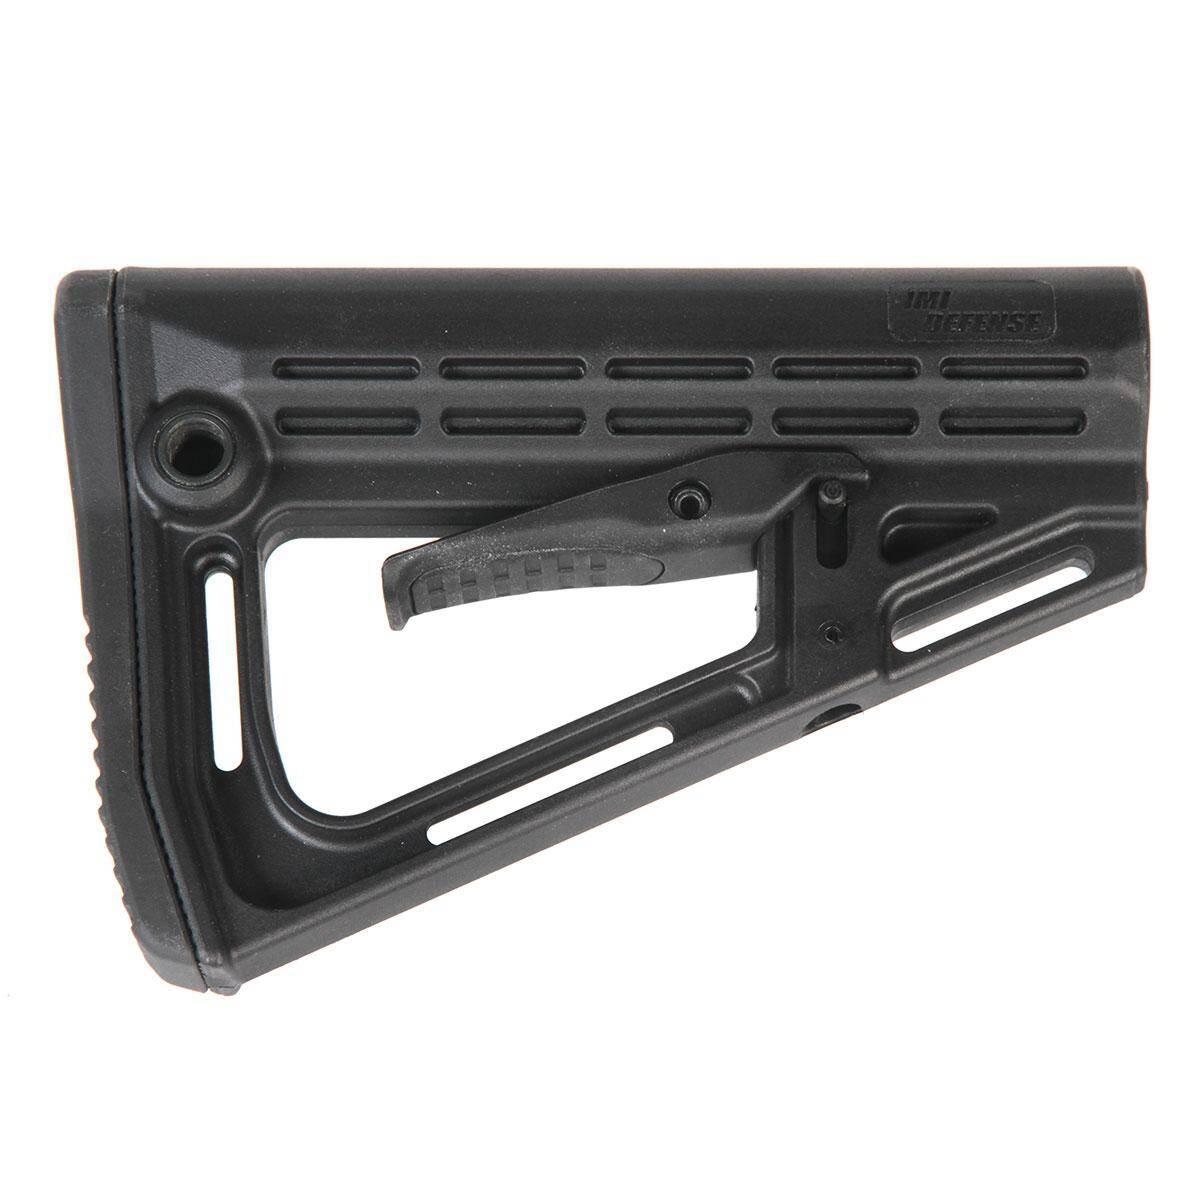 IMI TS1 M16/AR15/M4 Tactical Buttstock